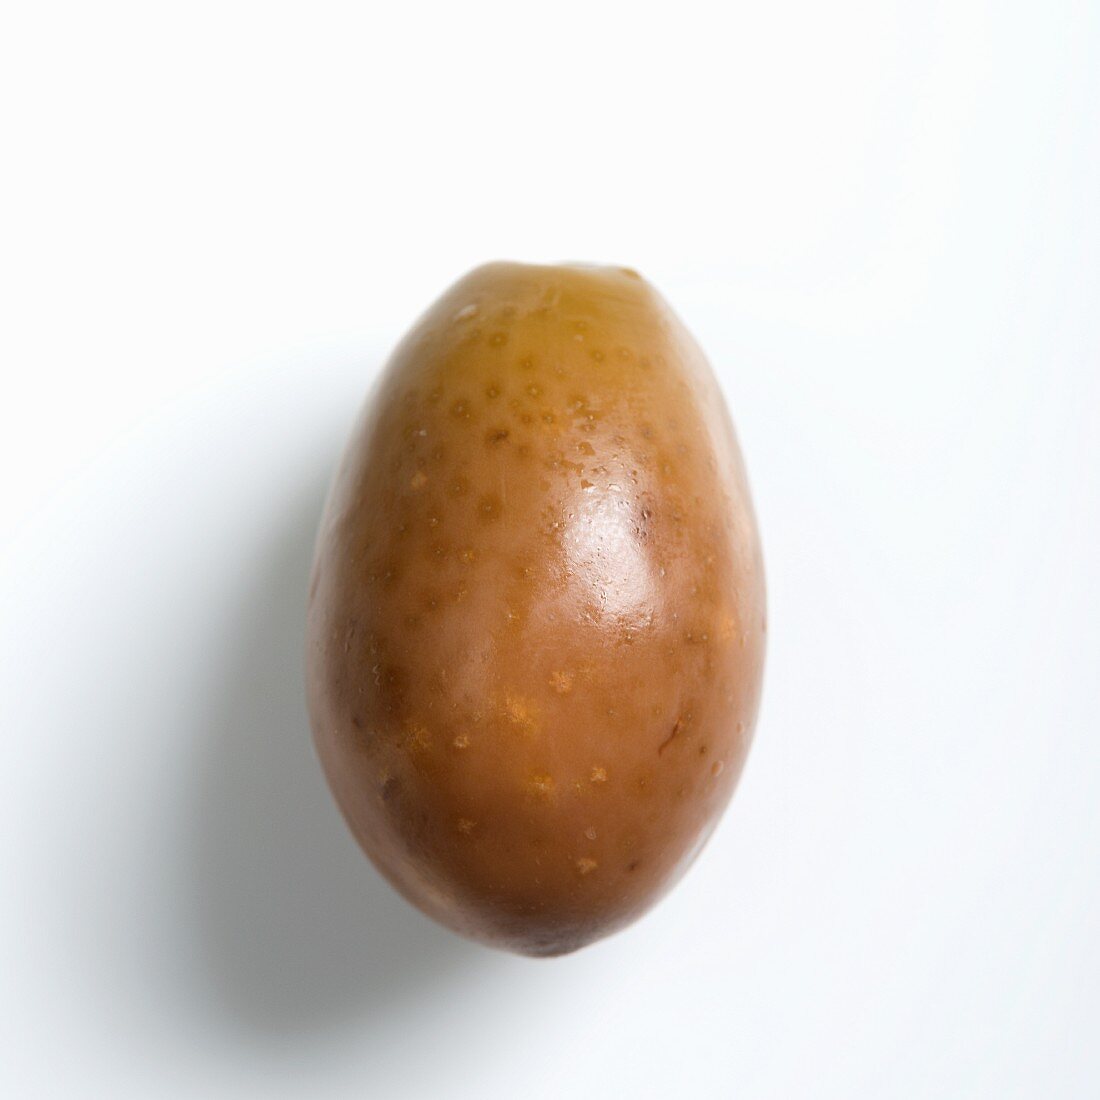 A green olive on a white surface